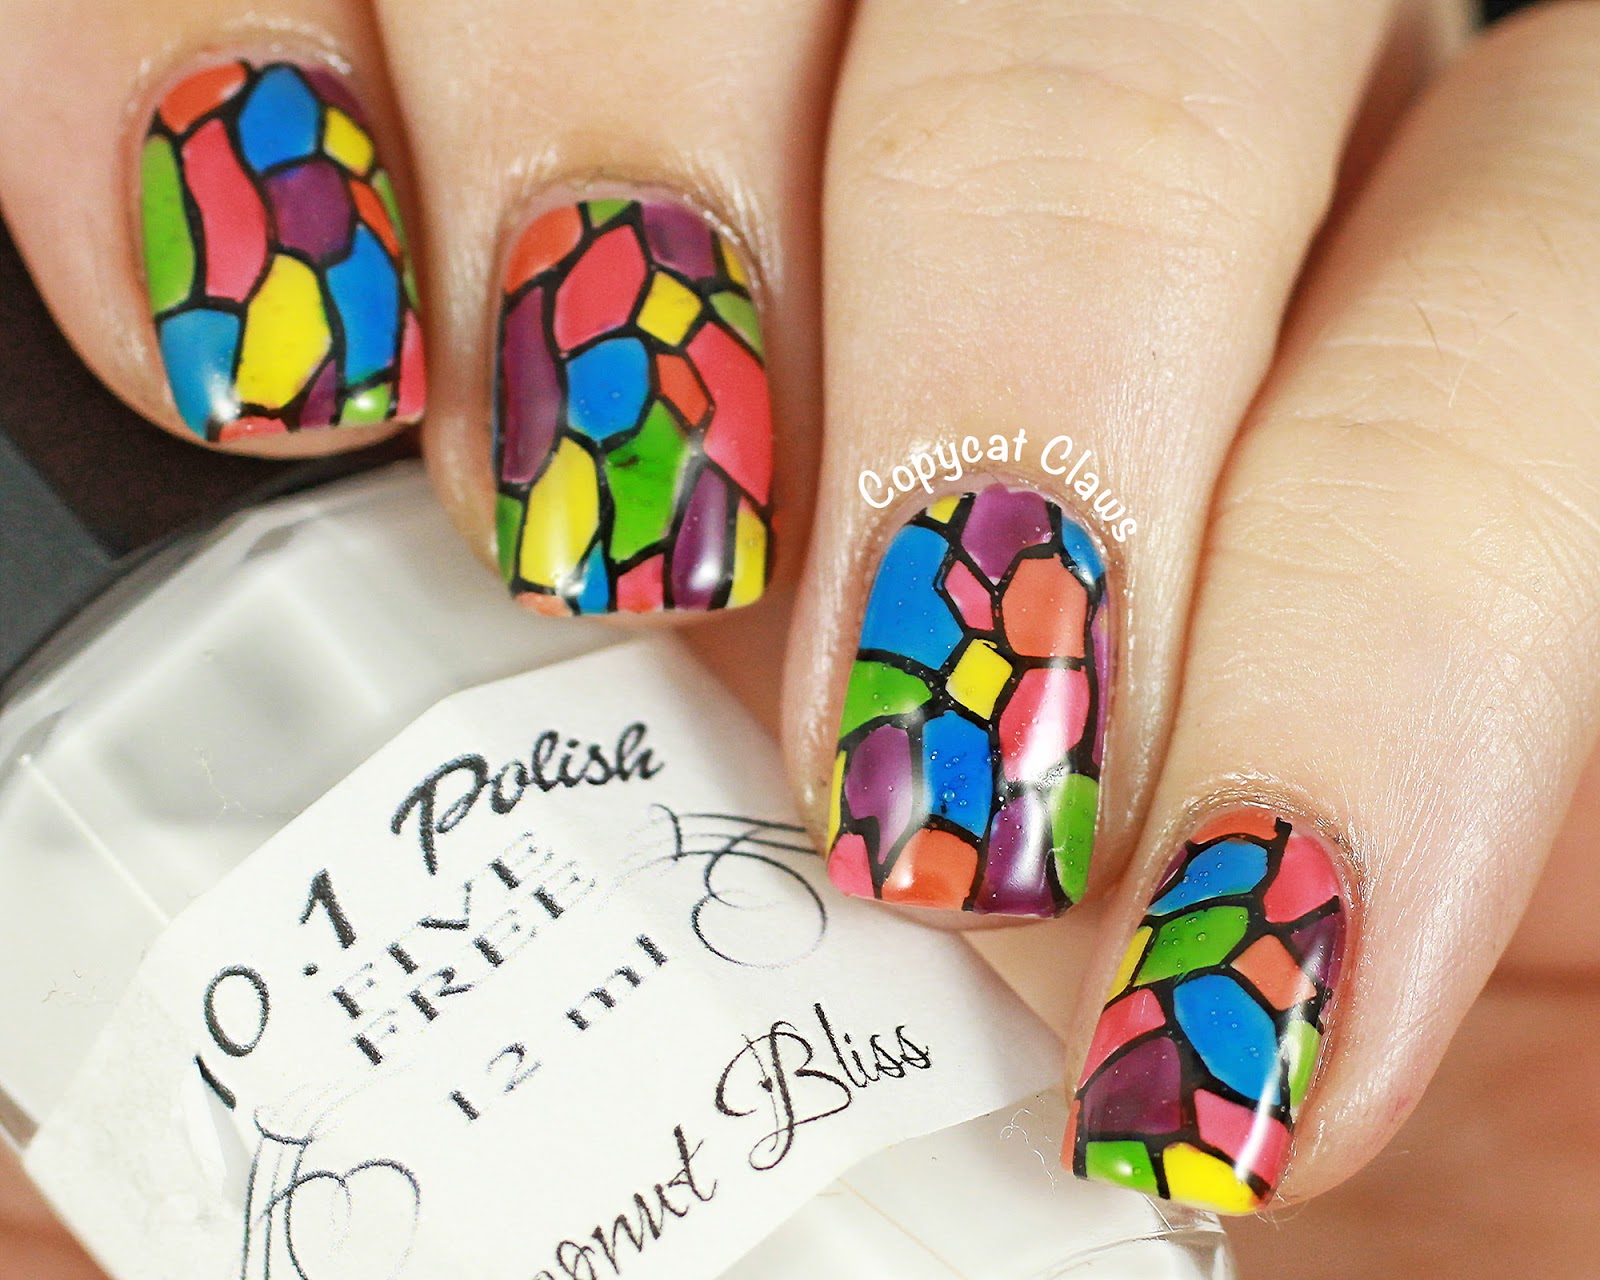 5. Stained Glass Nail Art with Nail Polish - wide 3